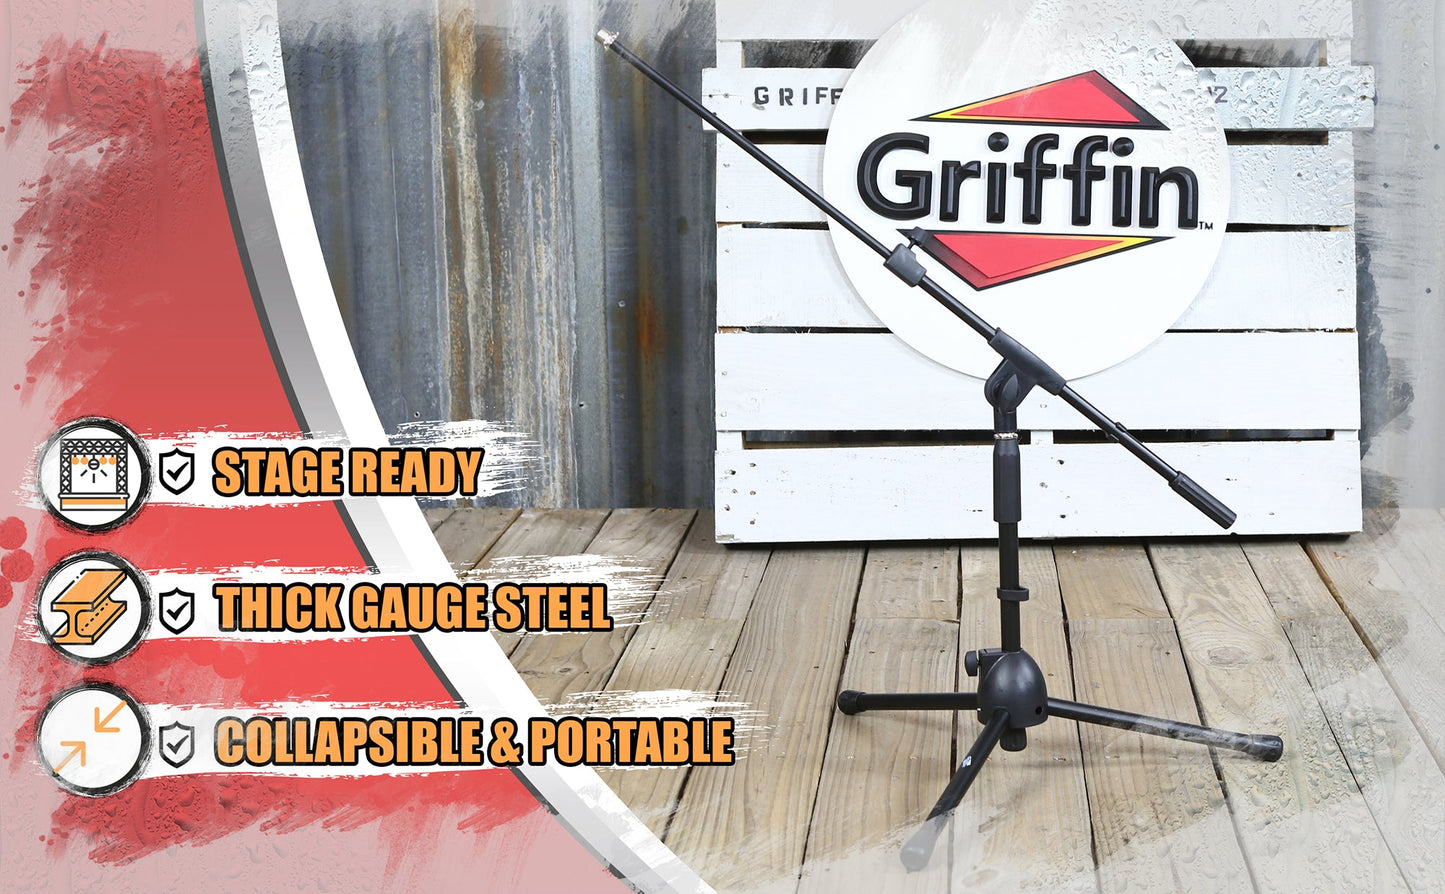 Short Microphone Stand with Boom Arm by GRIFFIN - Low Profile Tripod Mic Stand Mount for Kick Bass